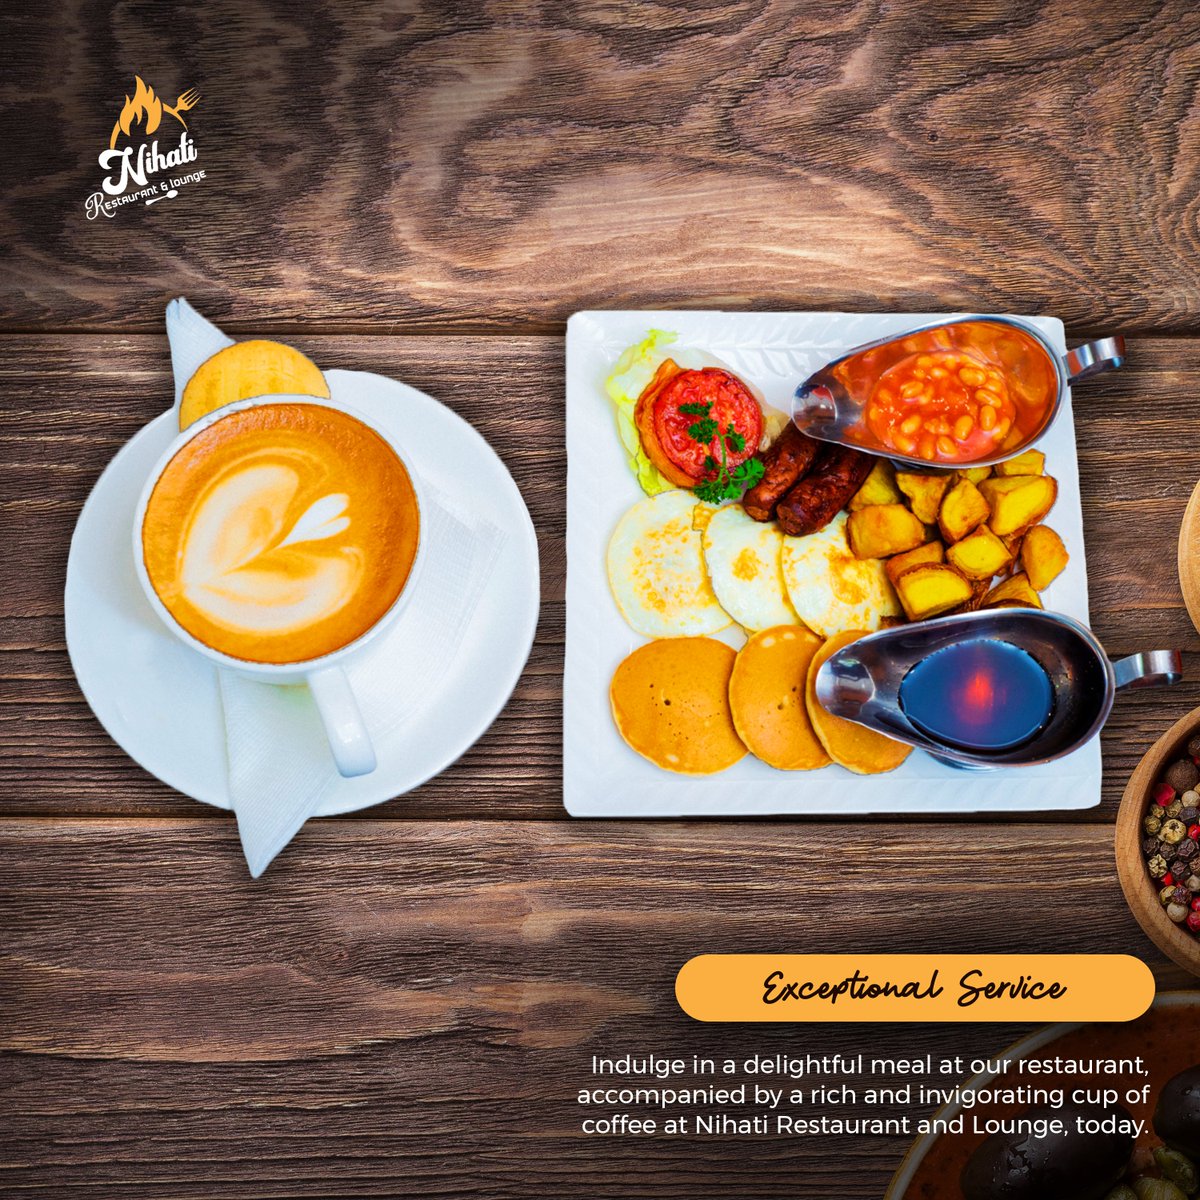 Indulge in a delightful meal at our restaurant, accompanied by a rich and invigorating cut of coffee at Nihati Restaurant and Lounge

#nihatirestaurantandlounge#restaurant#foodies#foodiesofinstagram#cocktails#àlacarte#foodporn#foodblogger#foodphotography#orderwithus#instafoodie